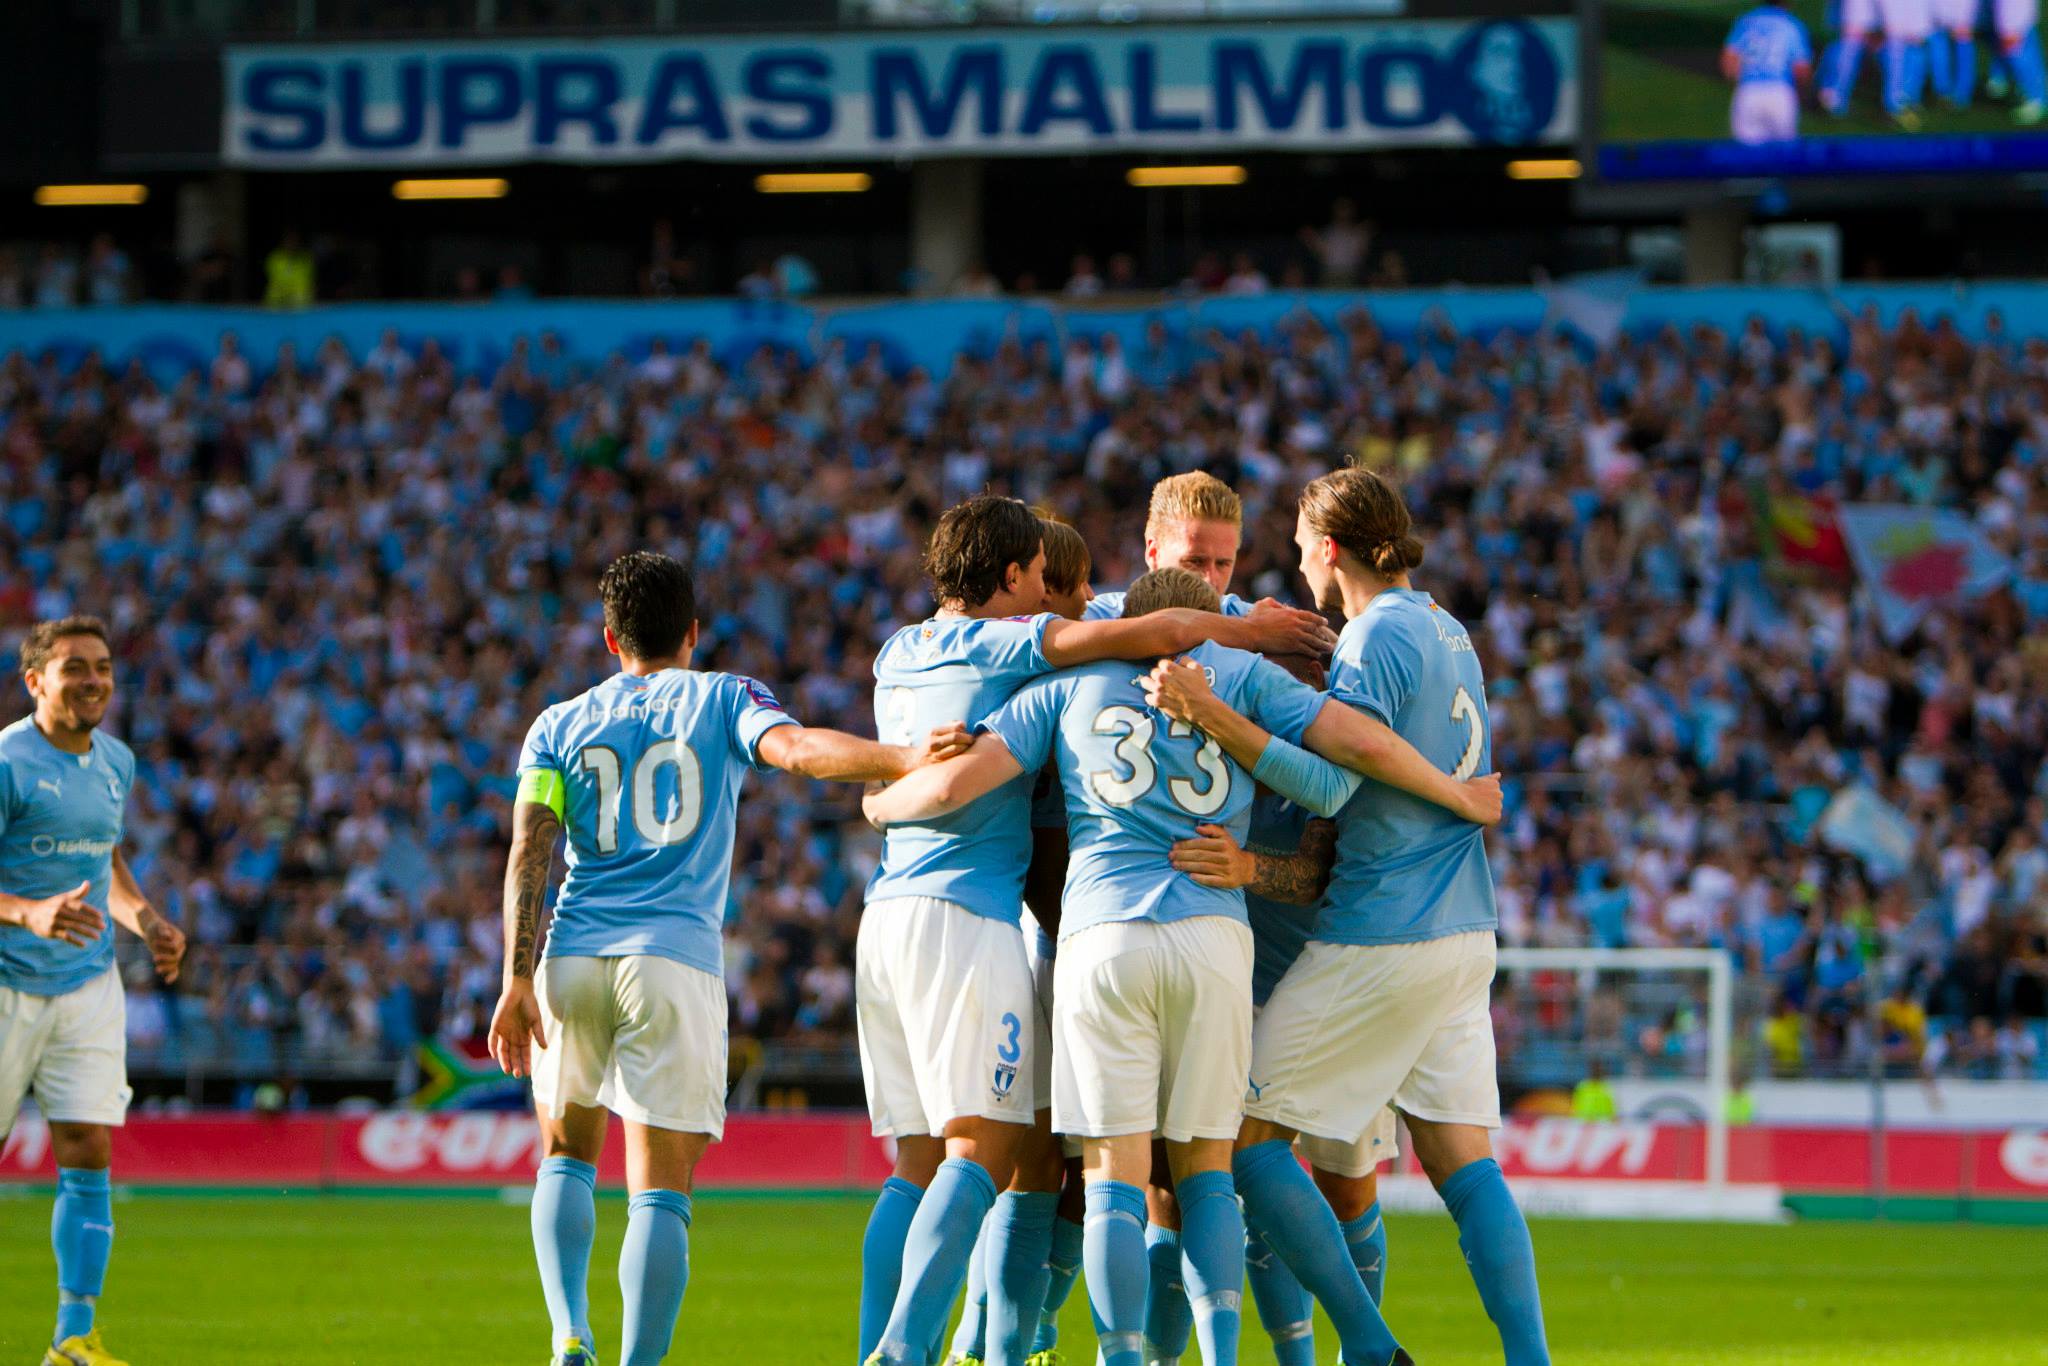 Malmo FF VS Jonkopings ( BETTING TIPS, Match Preview & Expert Analysis )™